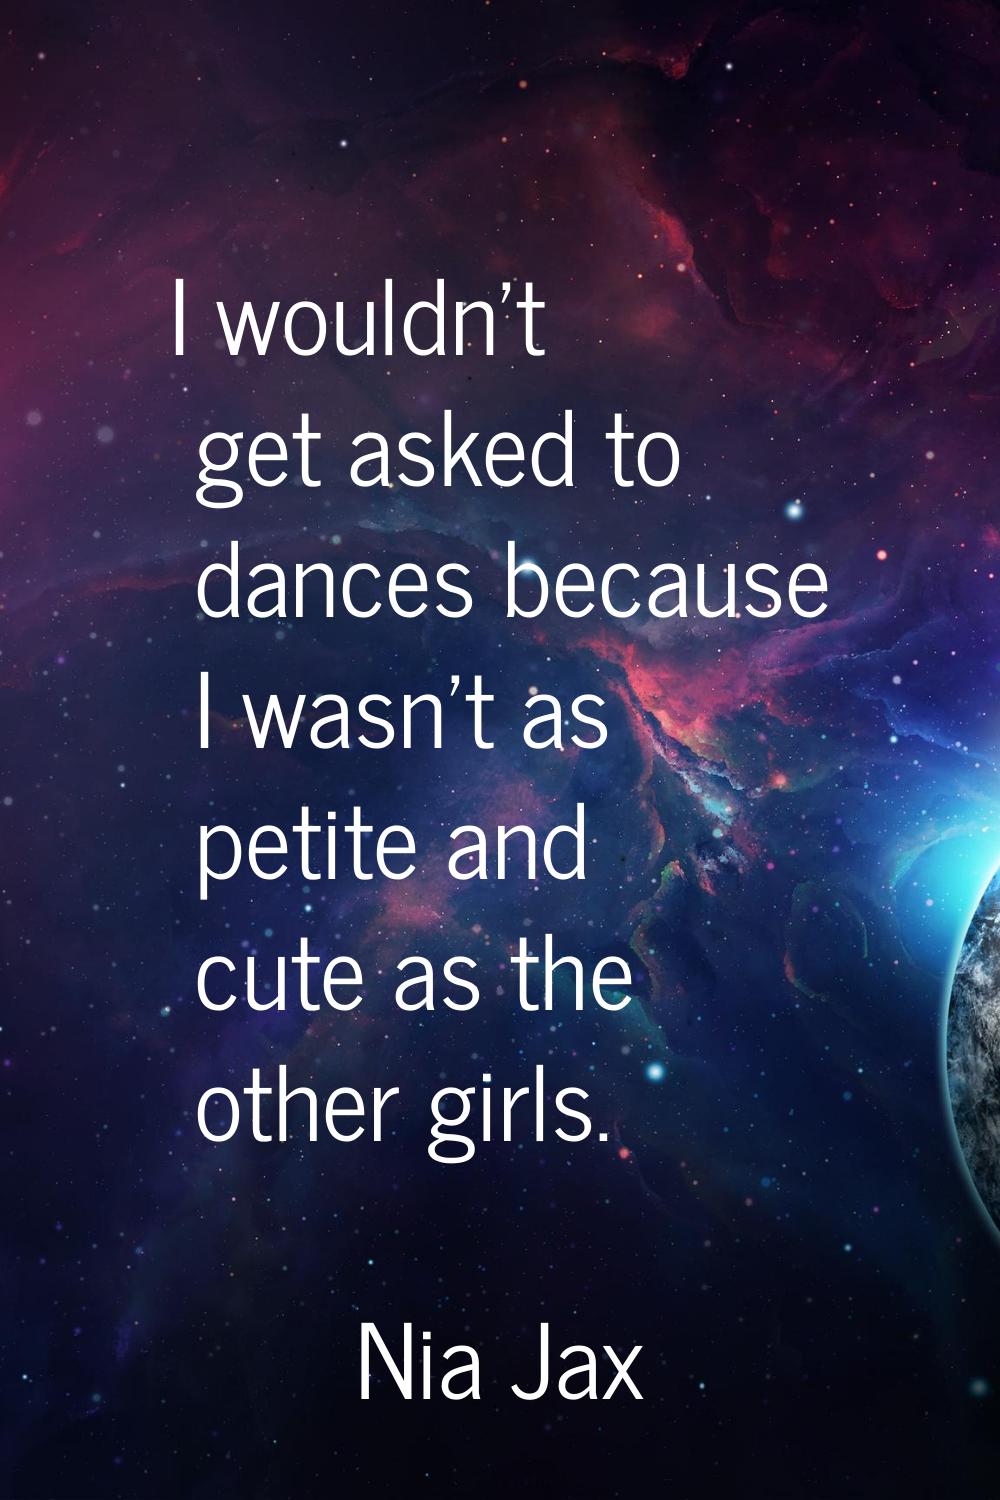 I wouldn't get asked to dances because I wasn't as petite and cute as the other girls.